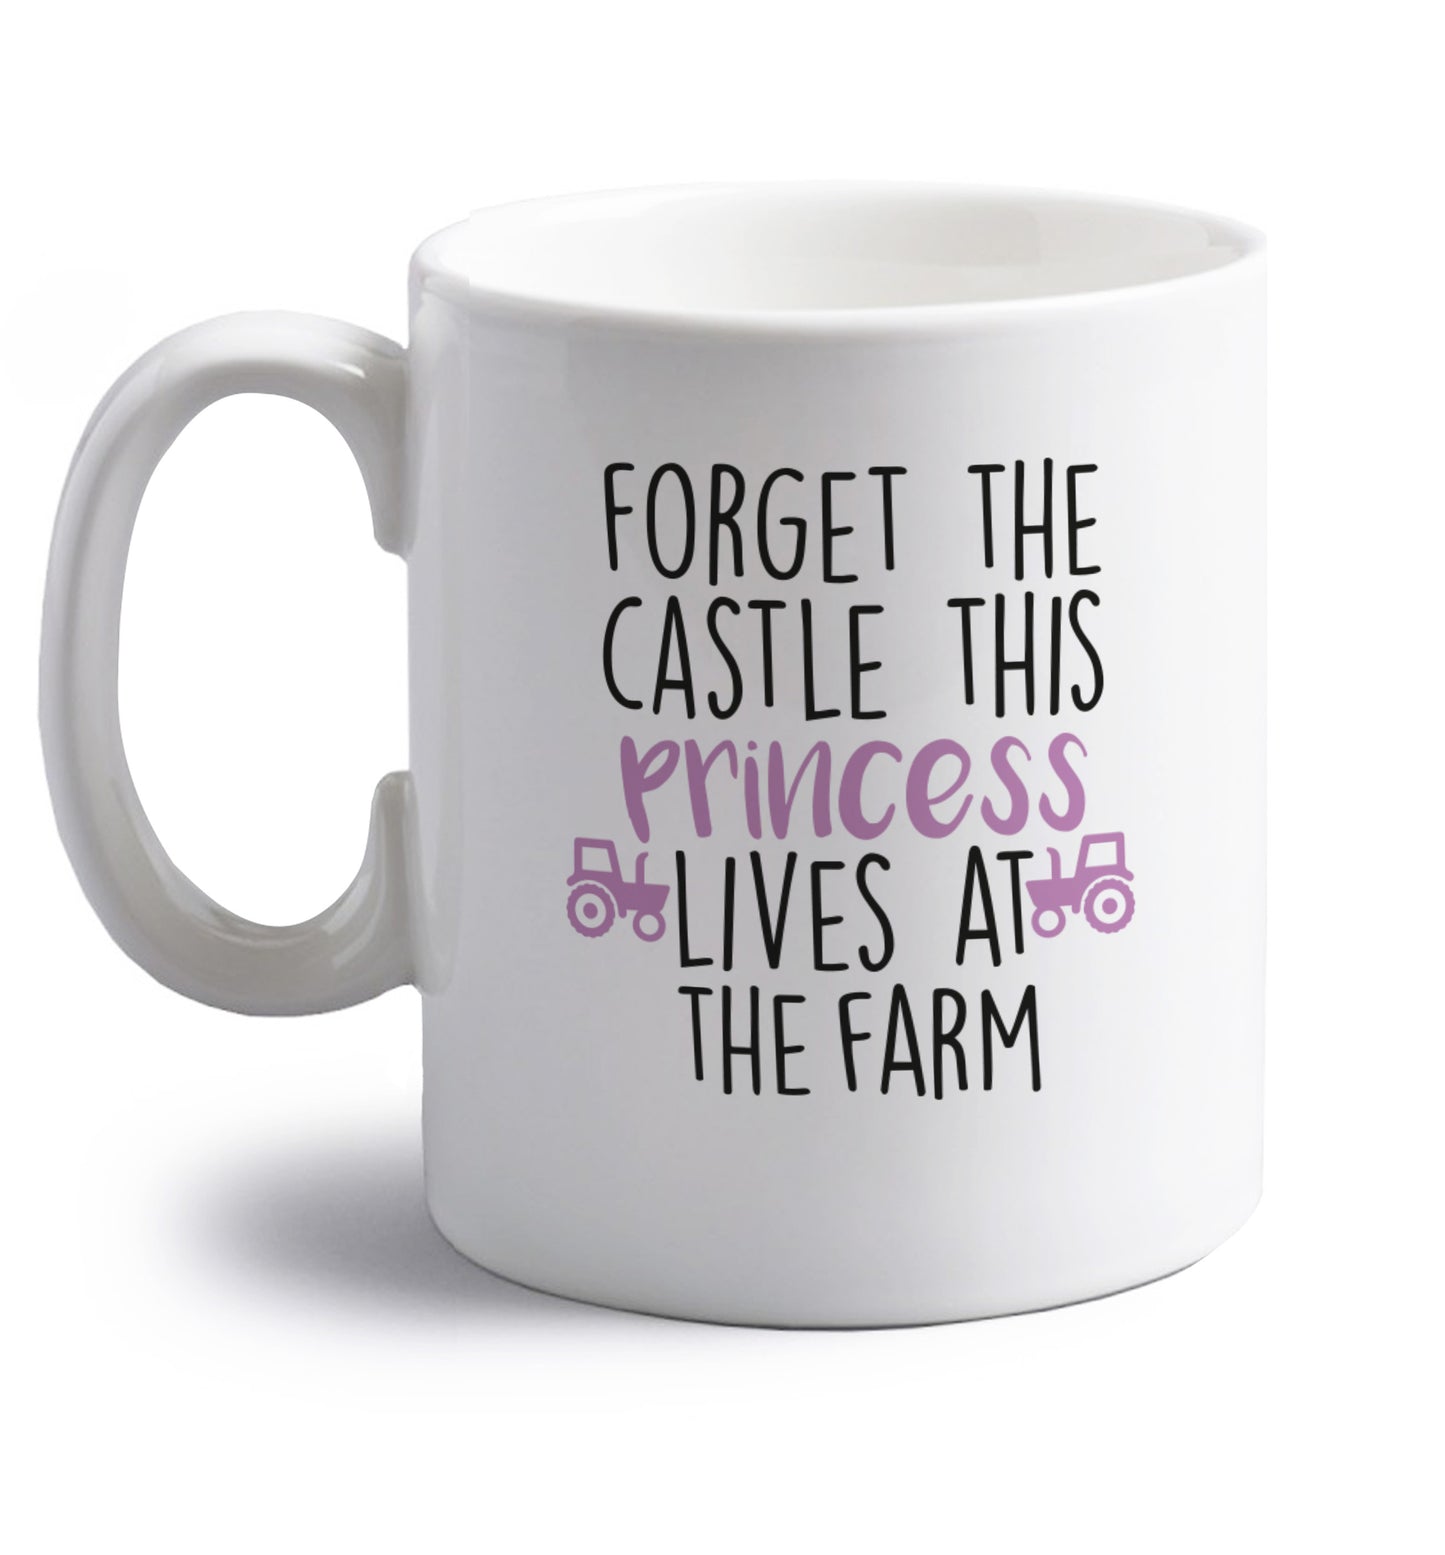 Forget the castle this princess lives at the farm right handed white ceramic mug 